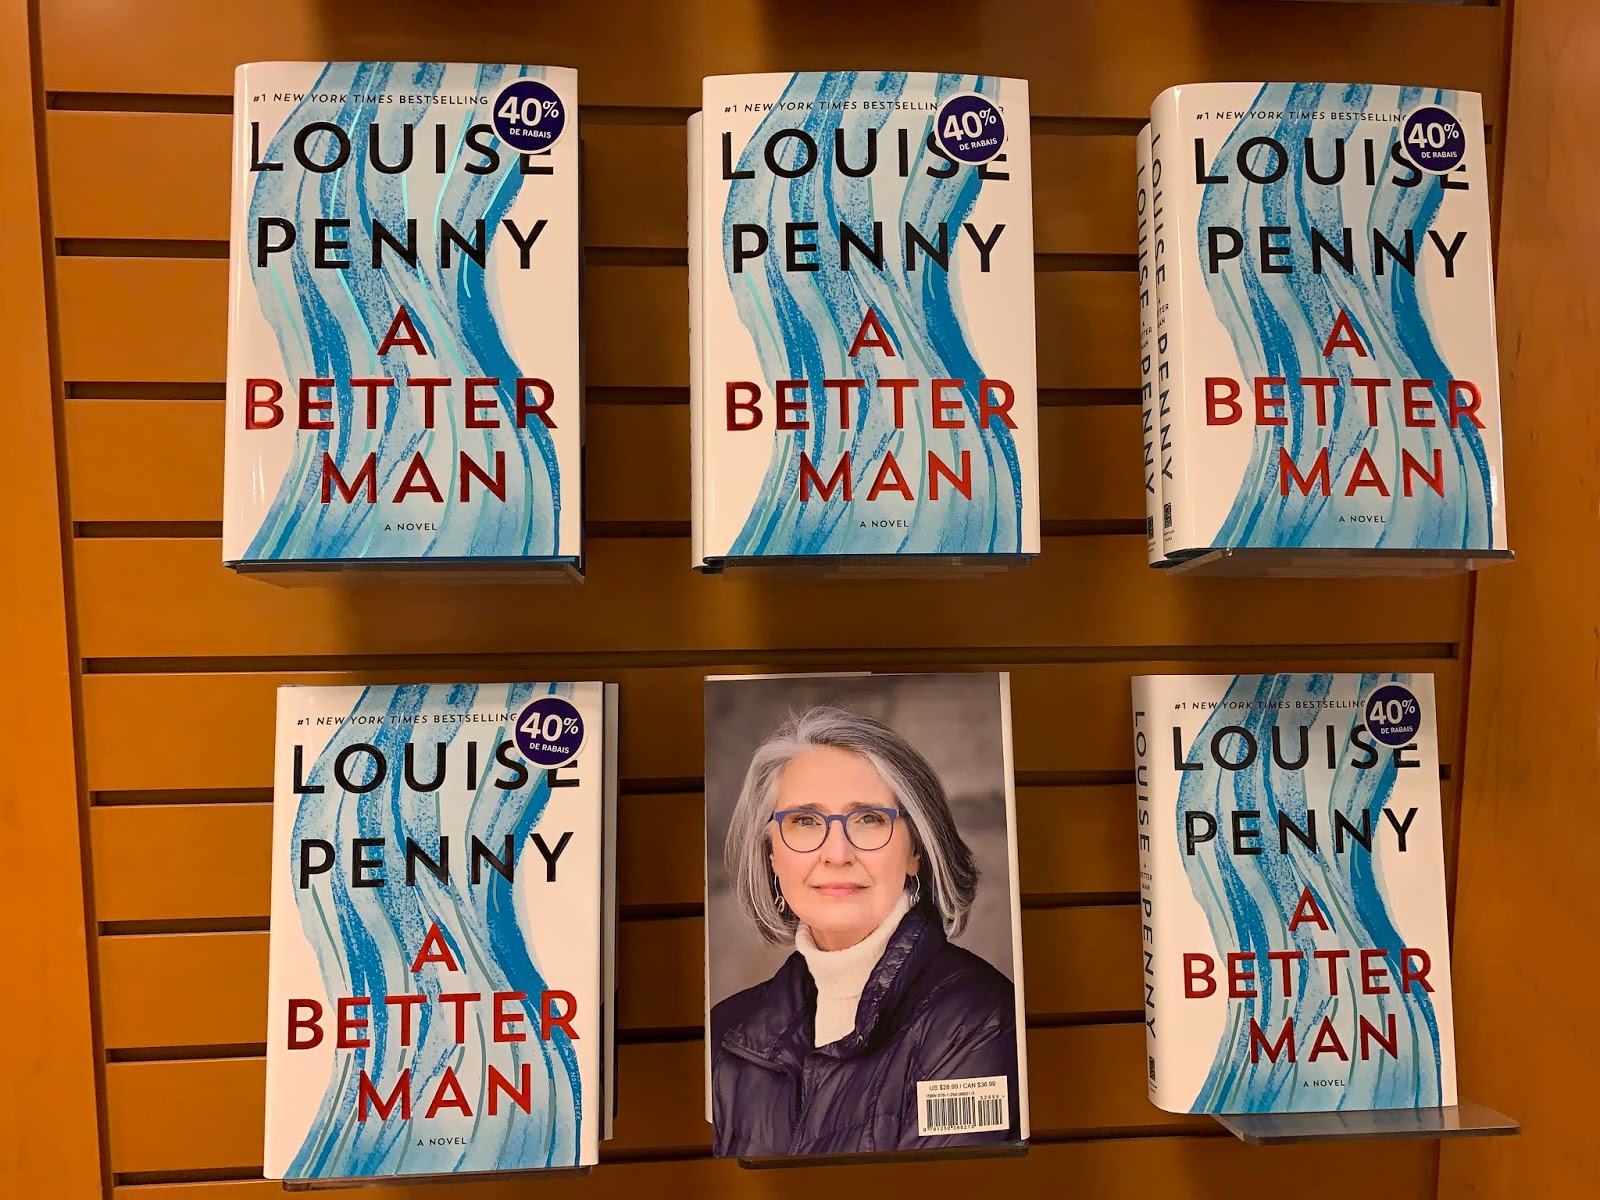  POINTS OF VIEW _______________ LOUISE PENNY AND HER NEW BOOK 2019